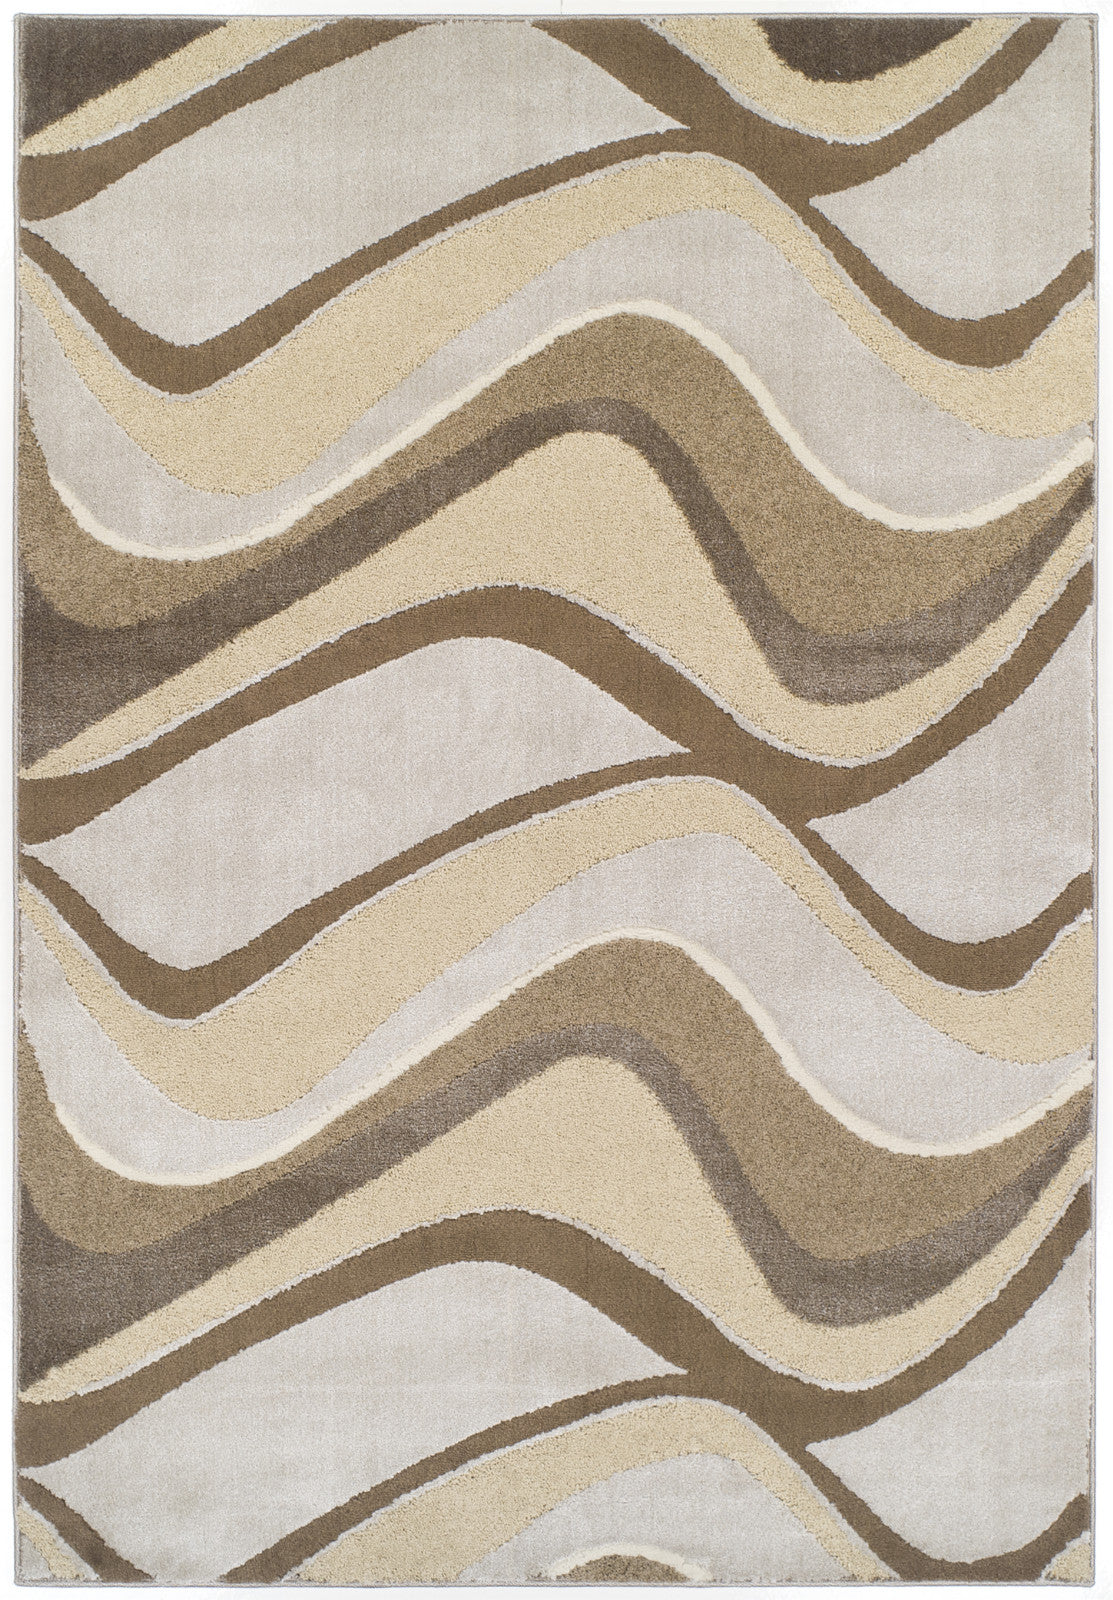 KAS Home Timeless 8005 Metallic Visions Machine Woven Area Rug by Donny Osmond